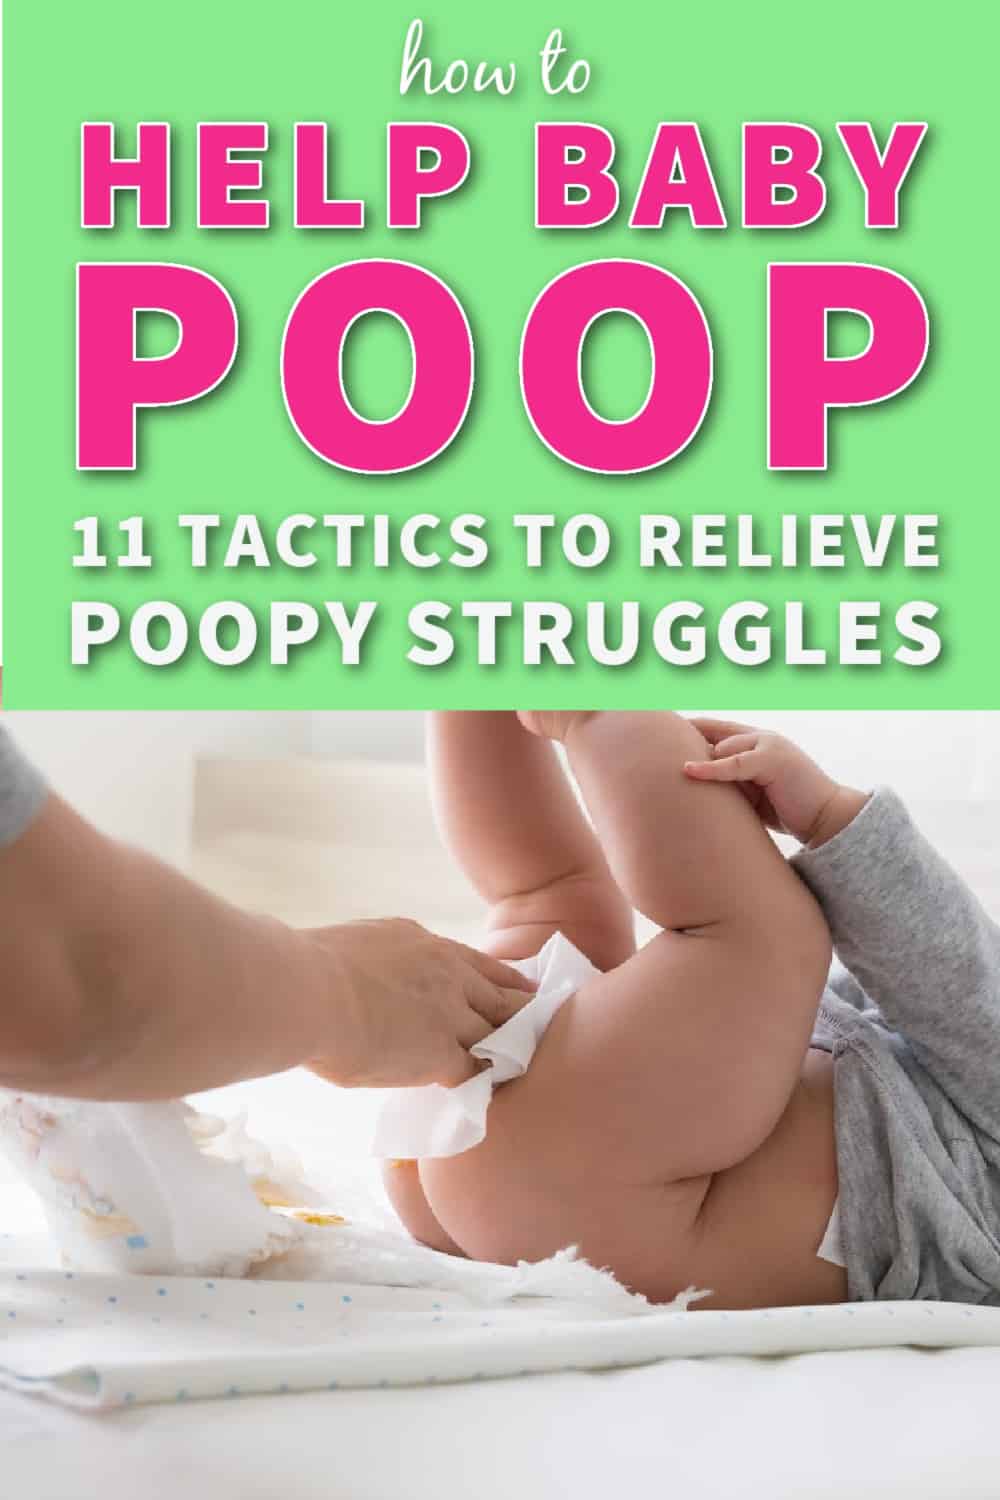 How to help a newborn poop instantly! 11 tried & tested ways to relieve poopy struggles